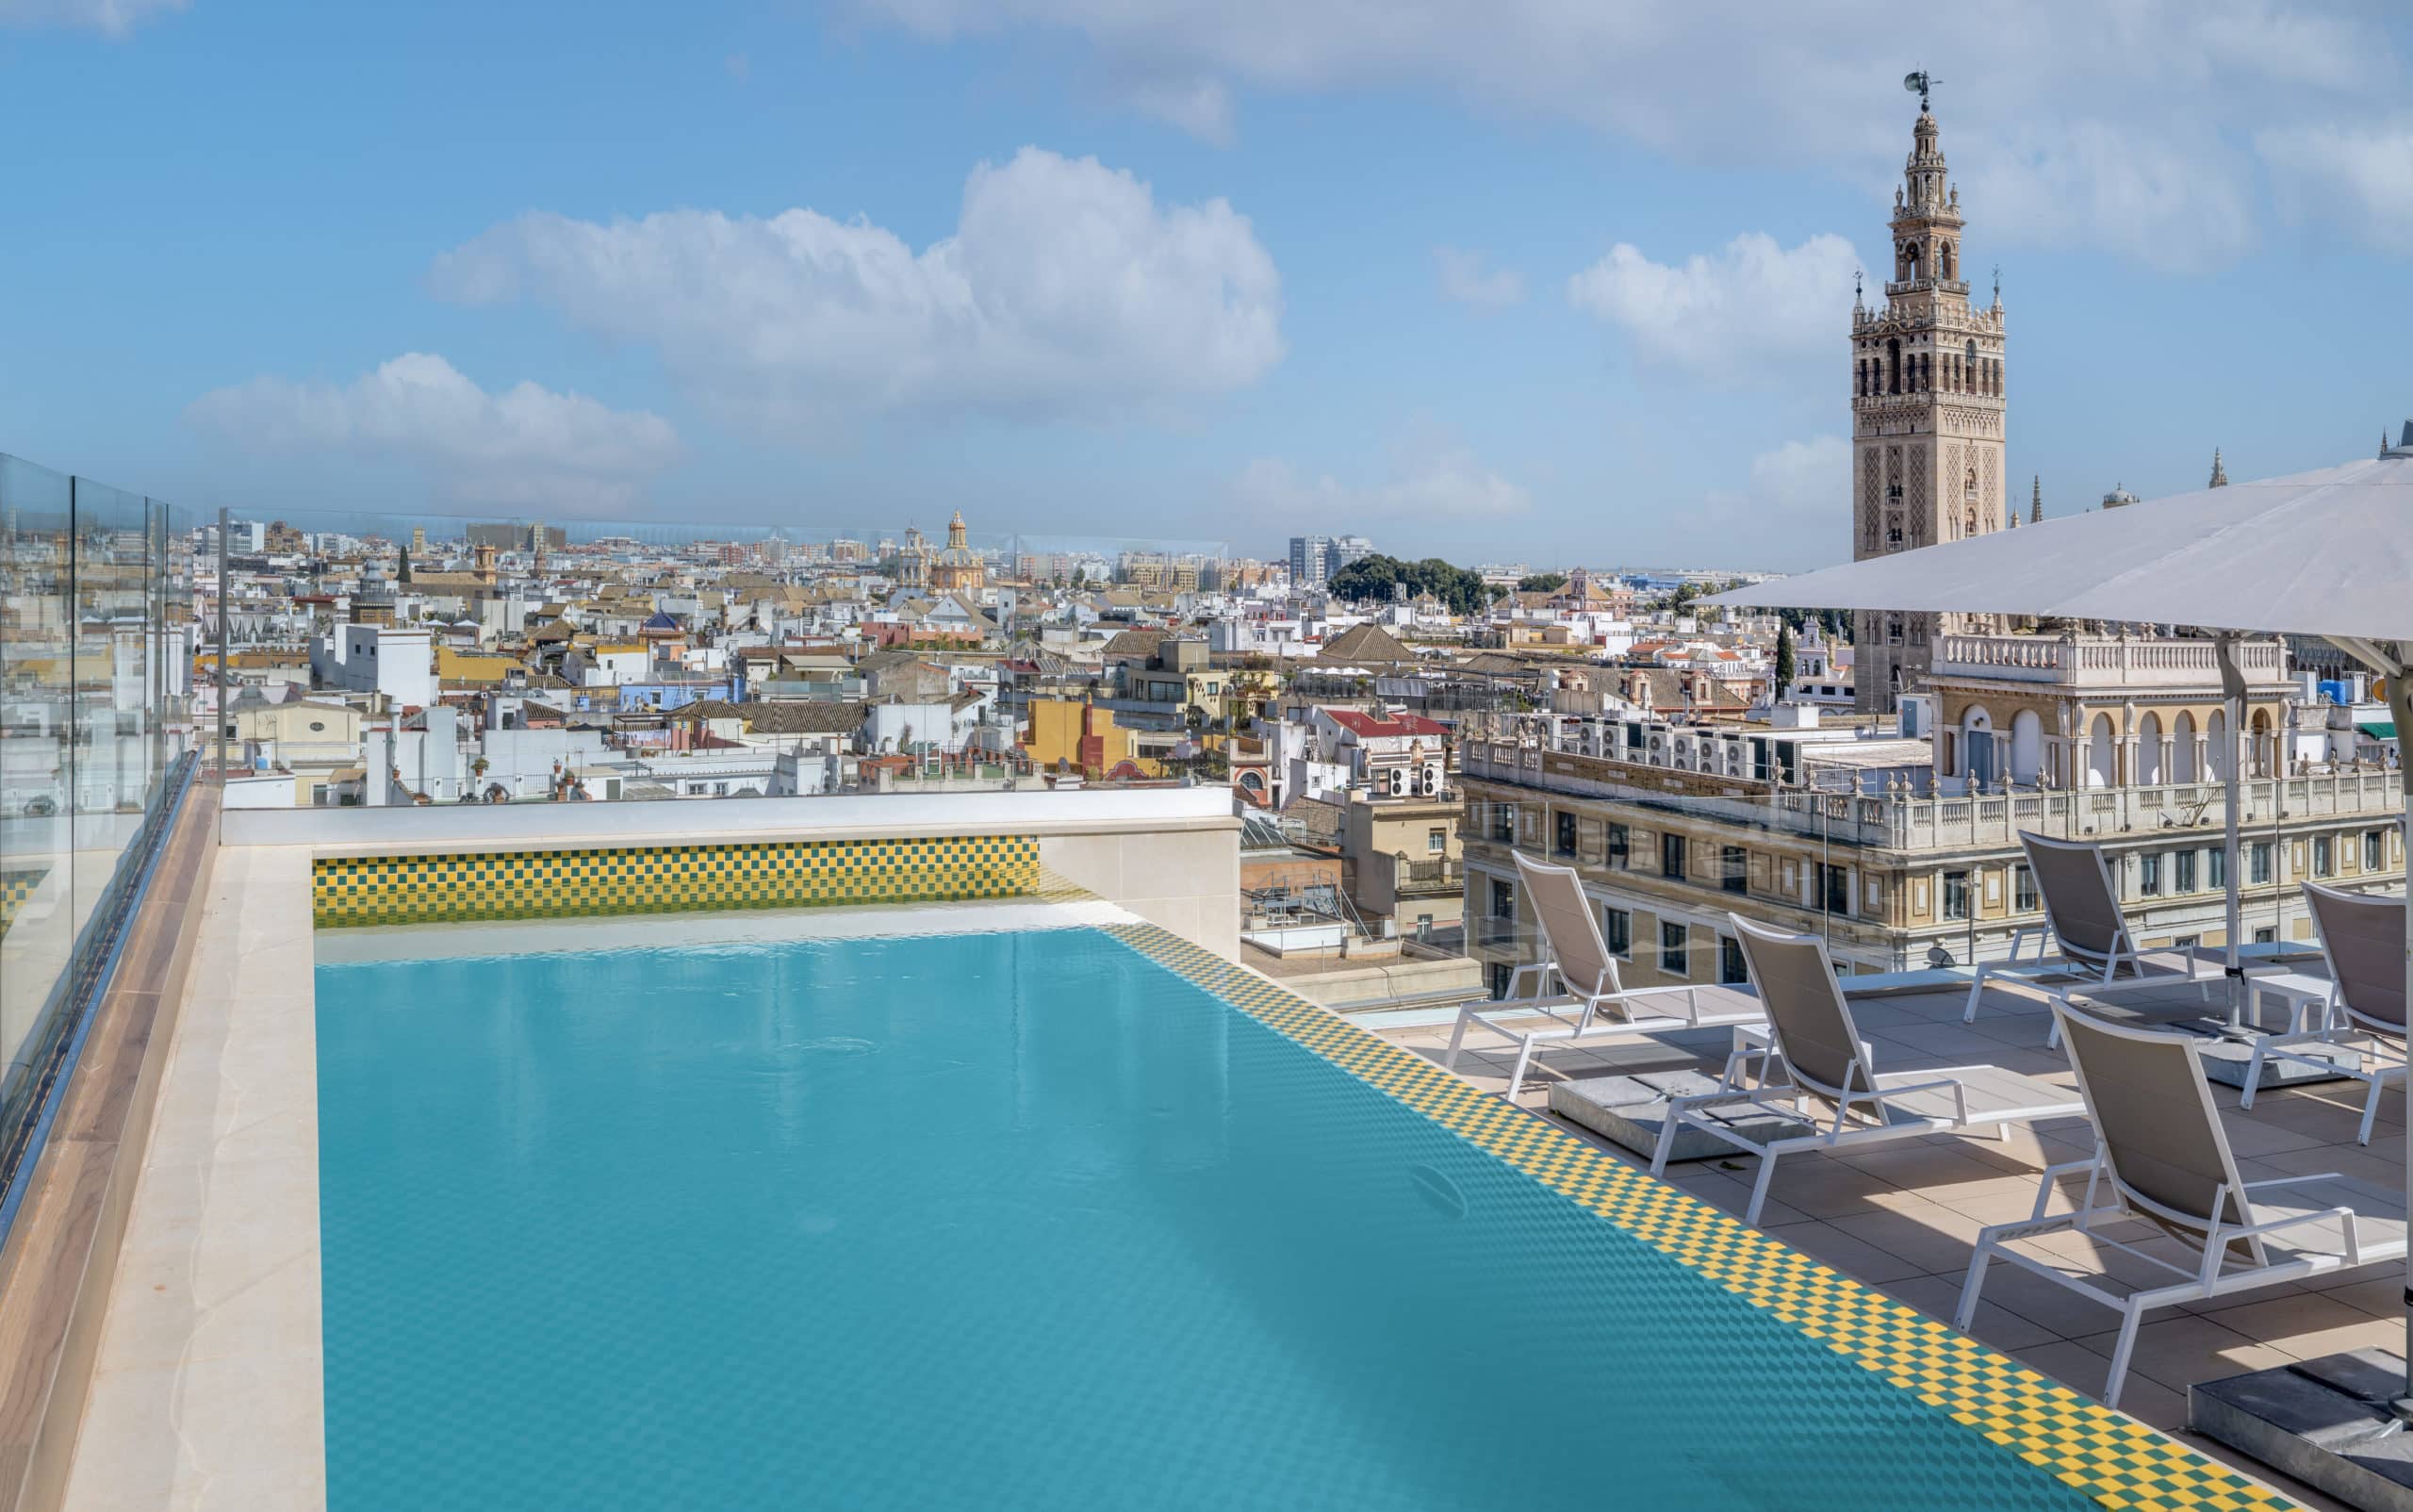 Explore one of Spain’s Most Sought-After Cities from this Design-Centric Hotel